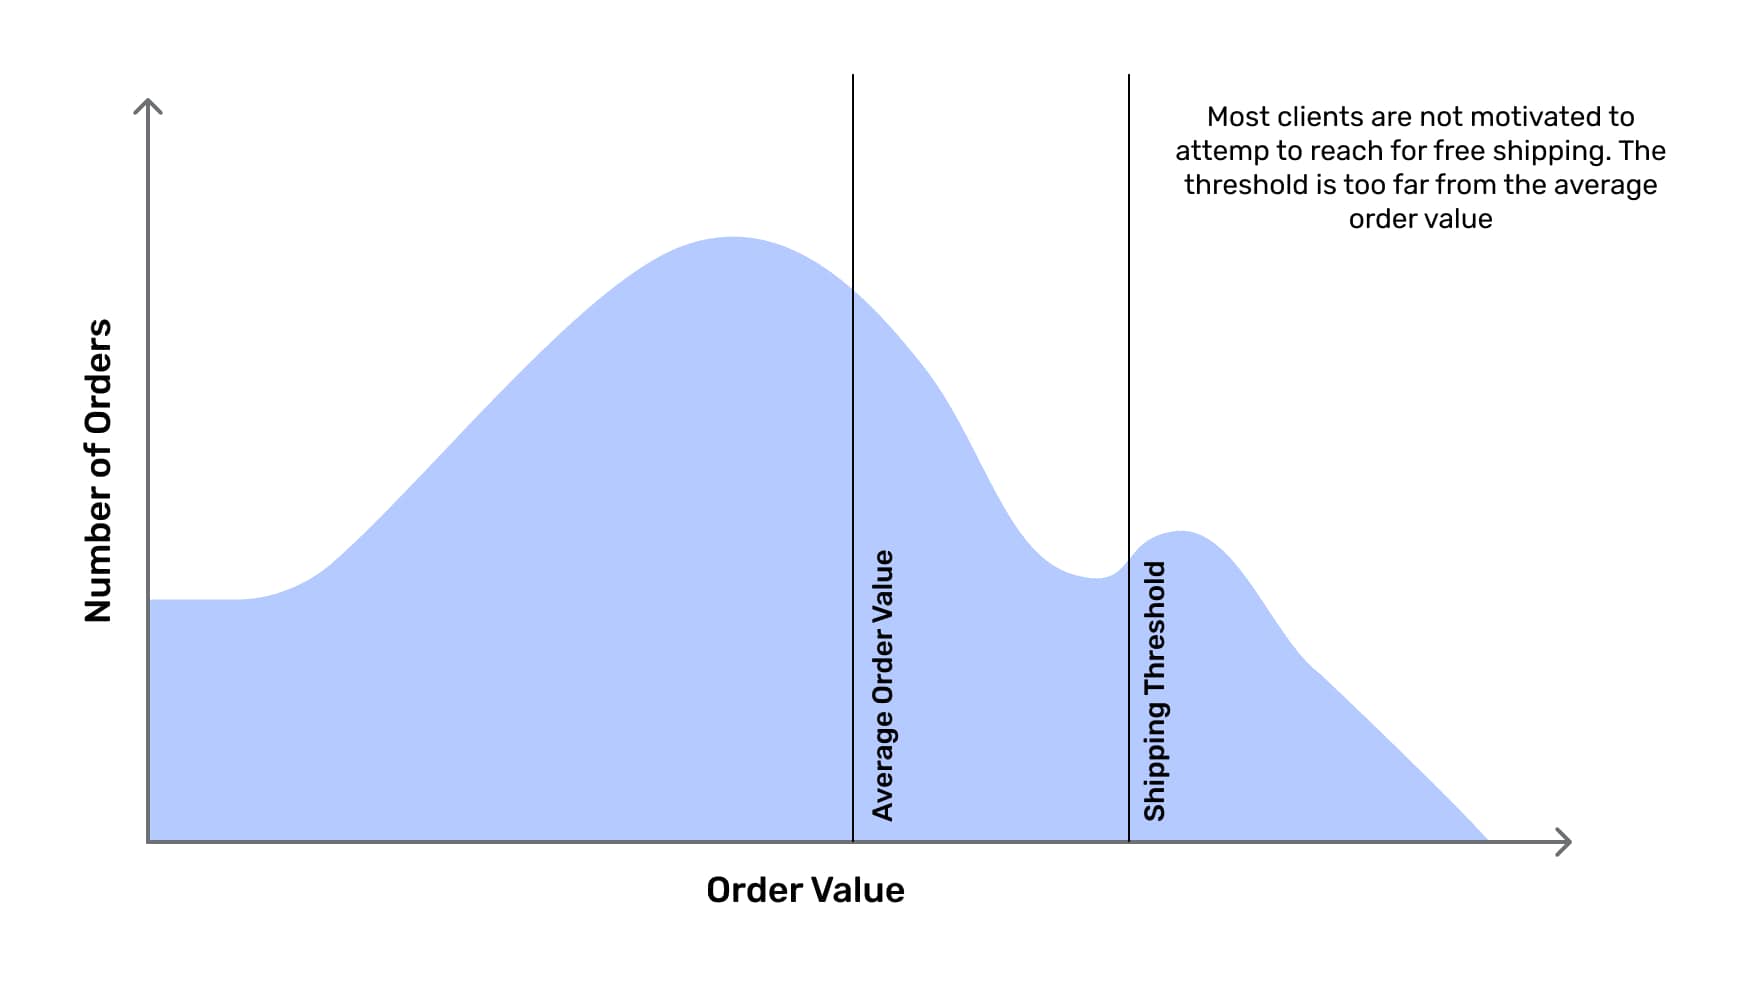 The graph displays the y-axis as "Number of Orders" and the x-axis as "Order Value". It features two bars: one representing the shipping threshold and the other representing Shopify AOV (Average Order Value). The description states, "Most clients are not motivated to attempt reaching the free shipping threshold as it is significantly higher than the average order value.”